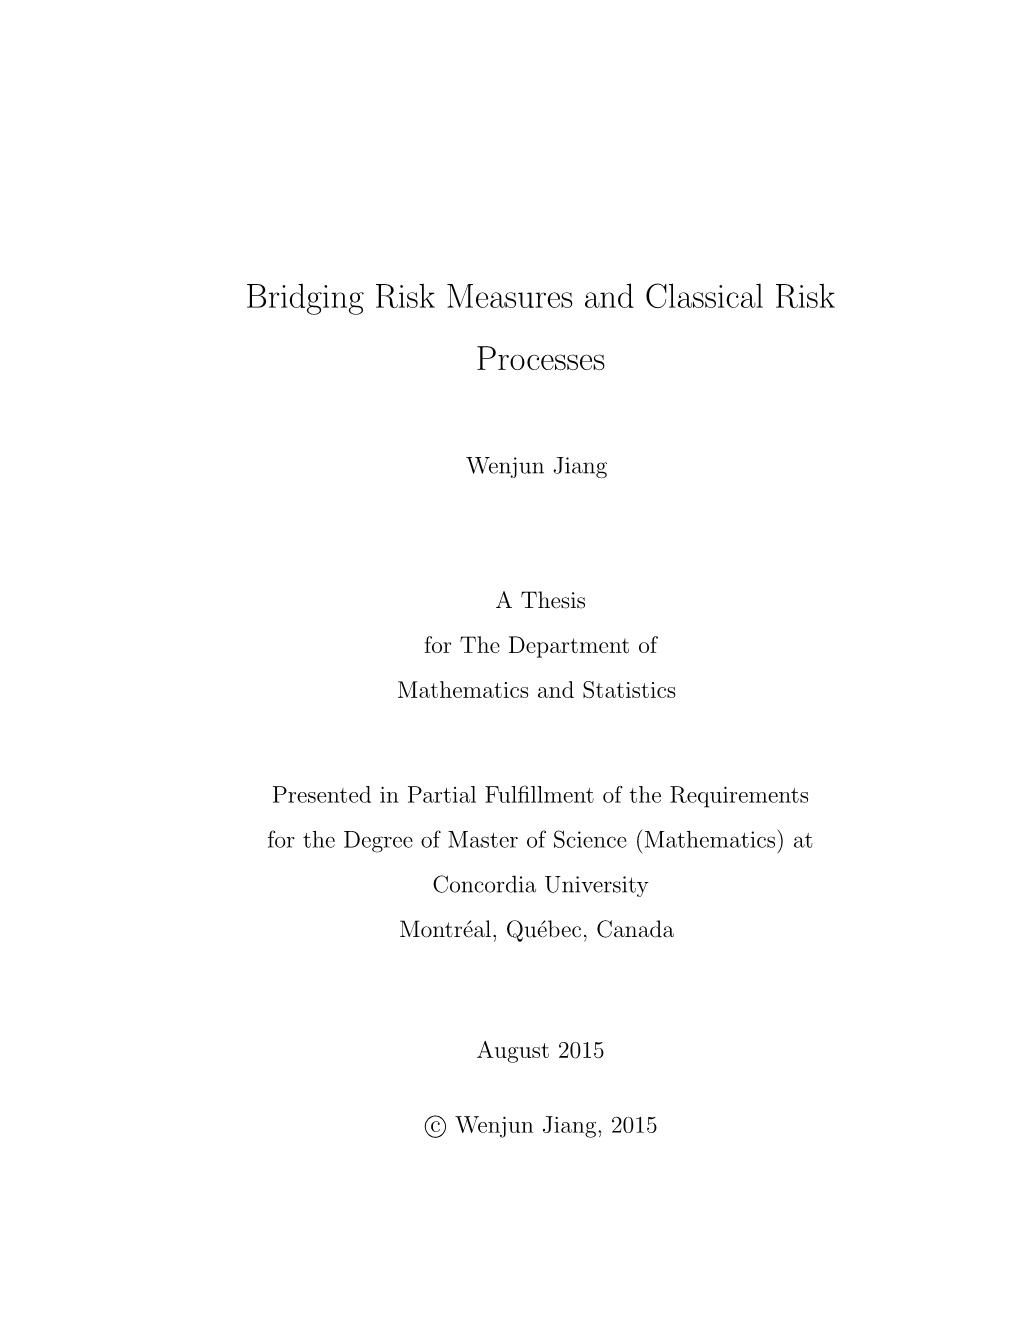 Bridging Risk Measures and Classical Risk Processes